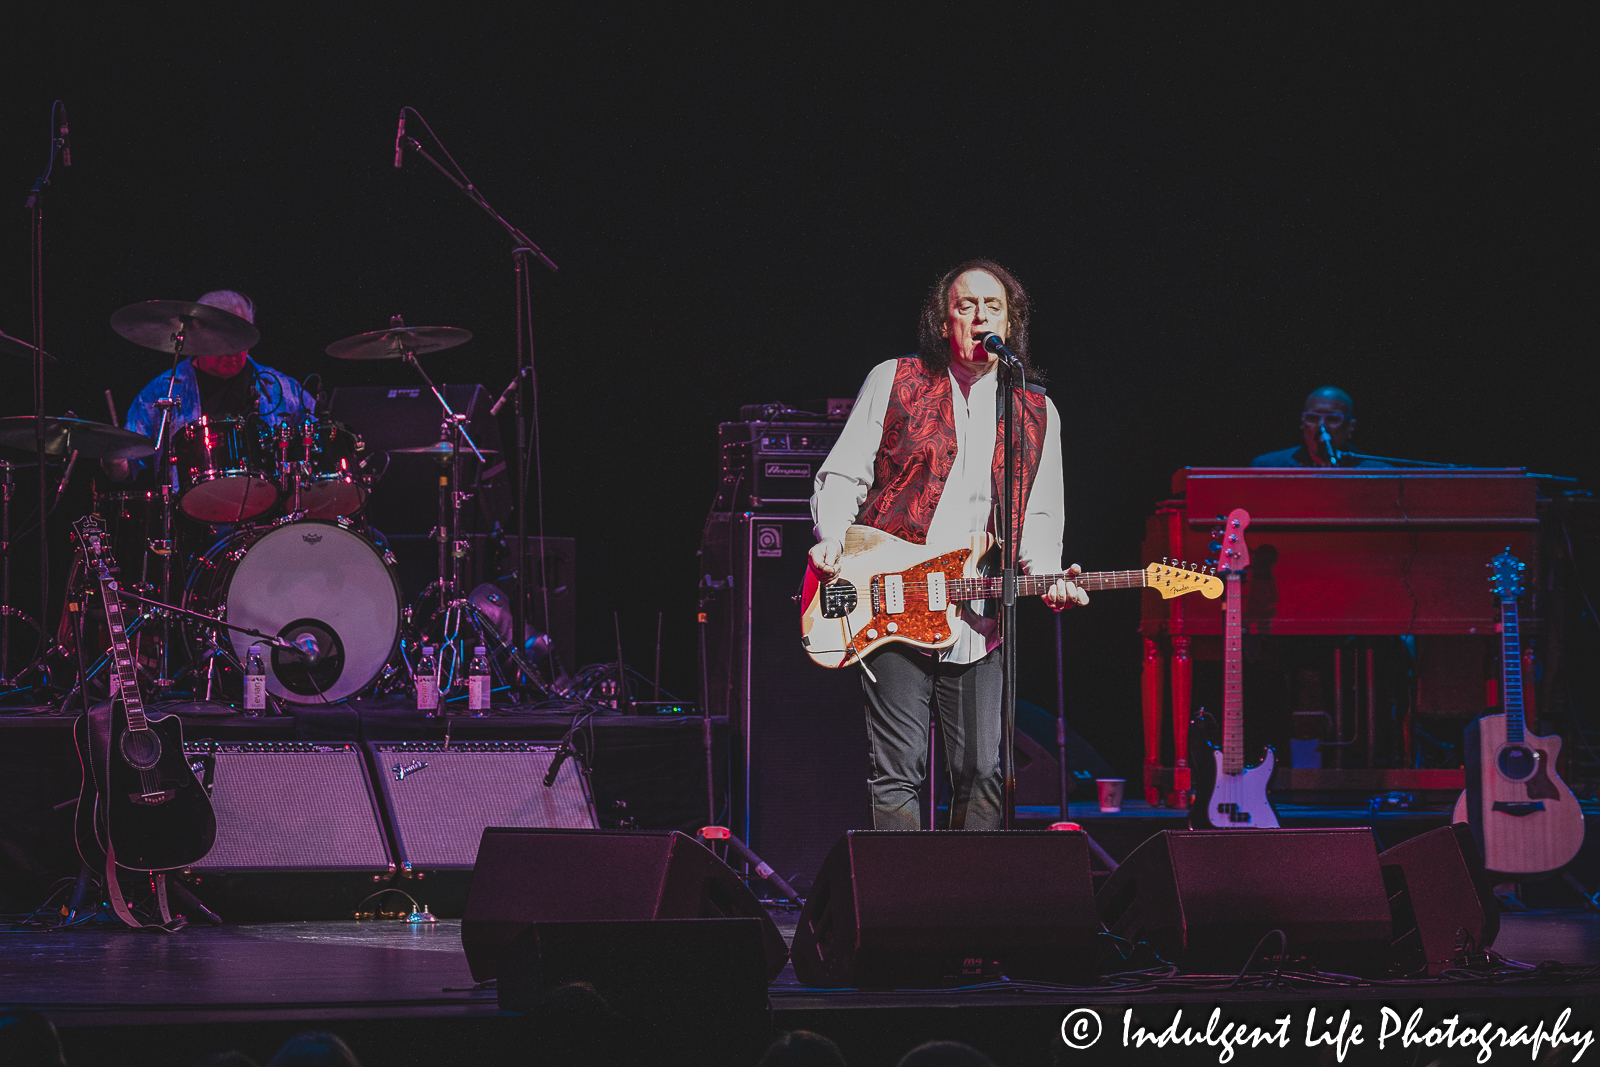 Tommy James performing "Draggin' the Line" from his "Christian of the World" album at Kauffman Center for the Performing Arts in Kansas City, MO on April 1, 2023.